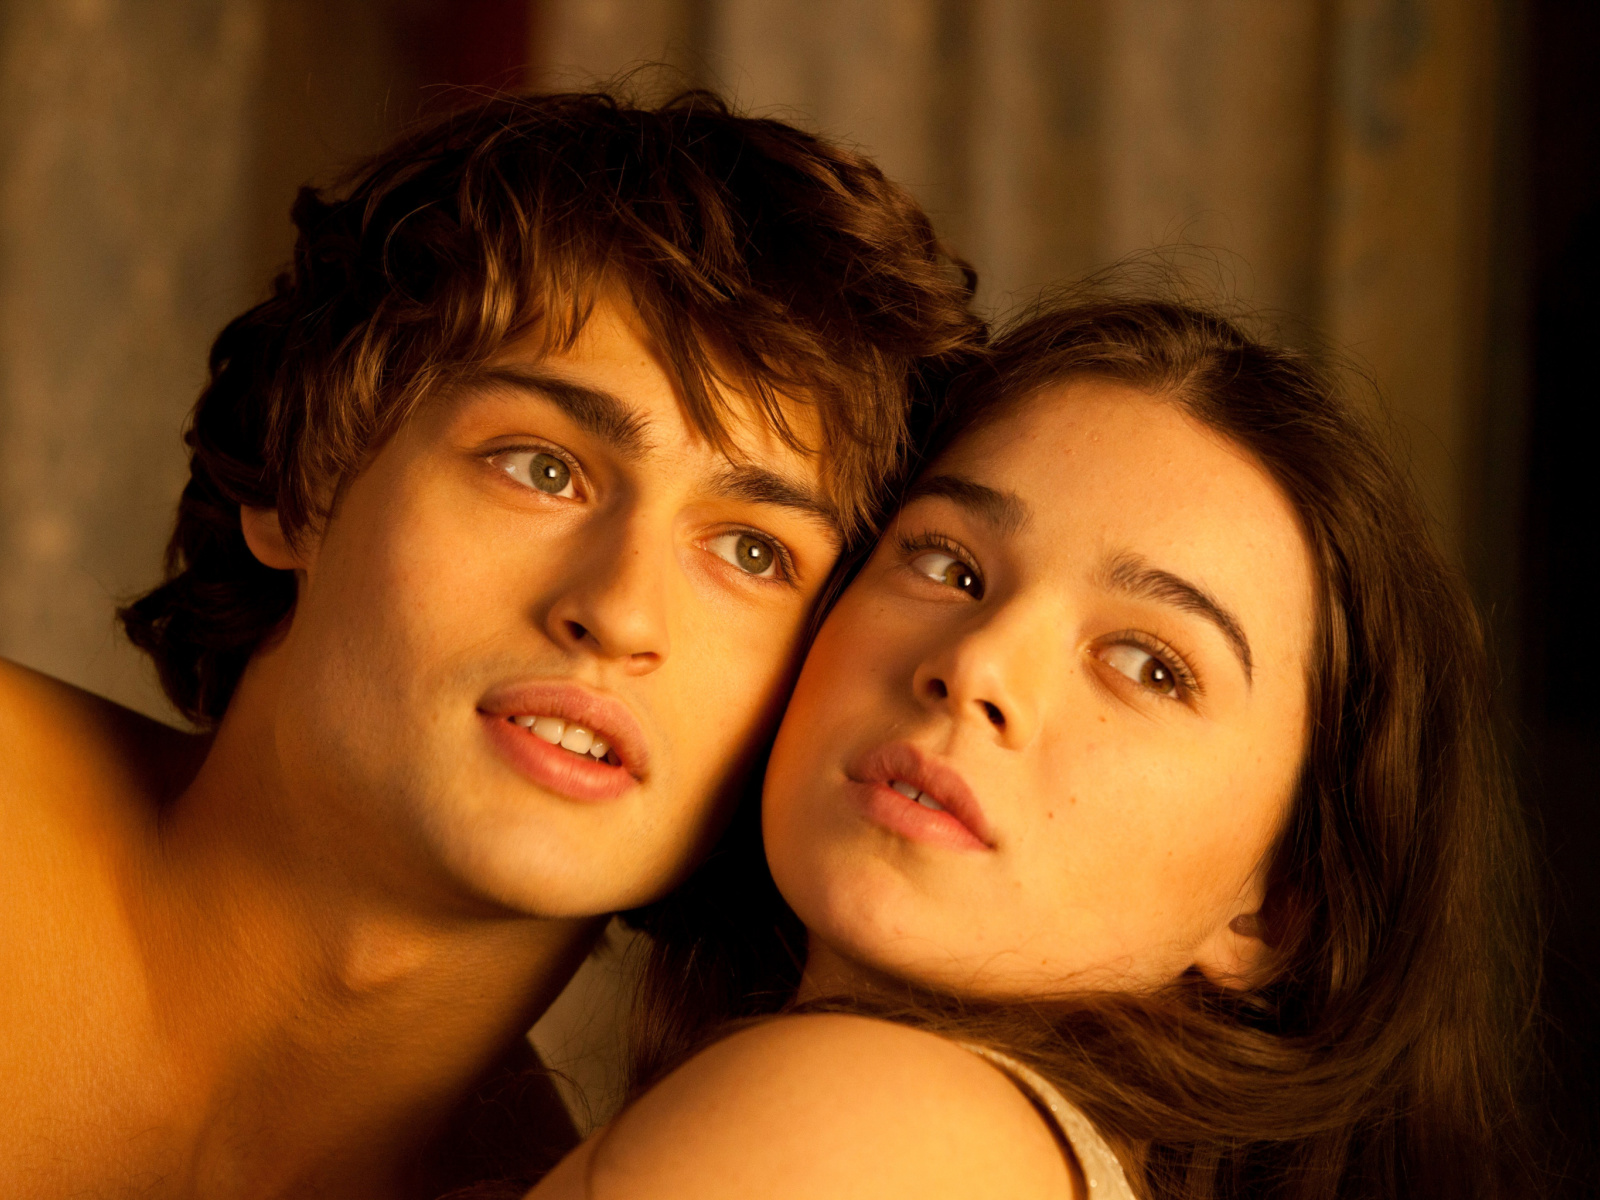 Romeo and Juliet with Hailee Steinfeld and Douglas Booth wallpaper 1600x1200